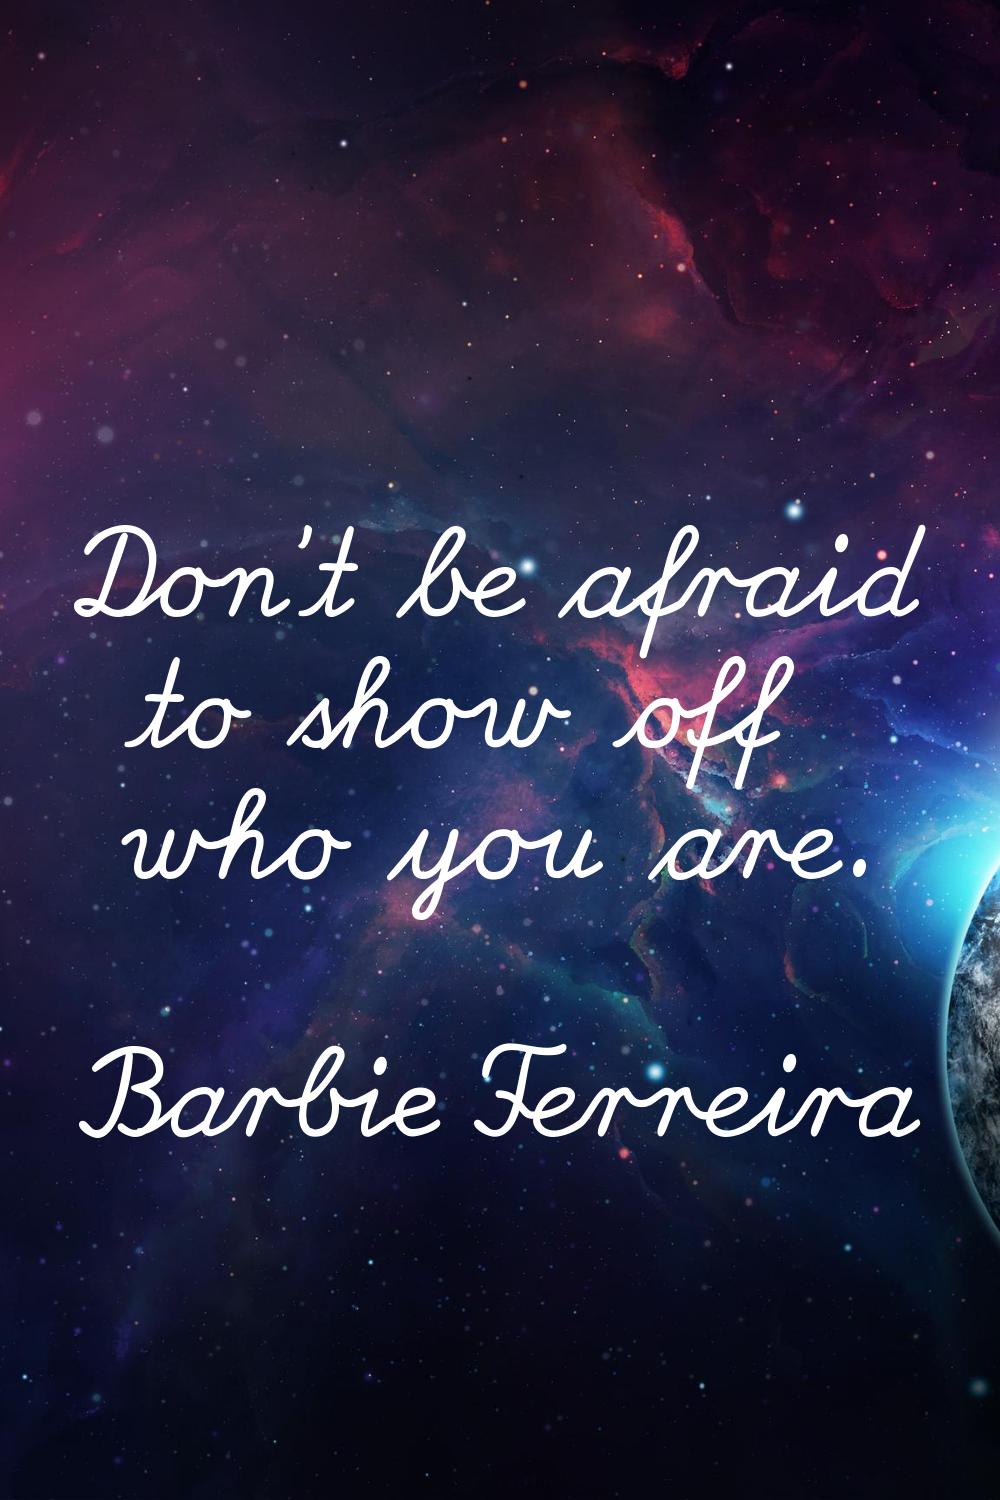 Don't be afraid to show off who you are.